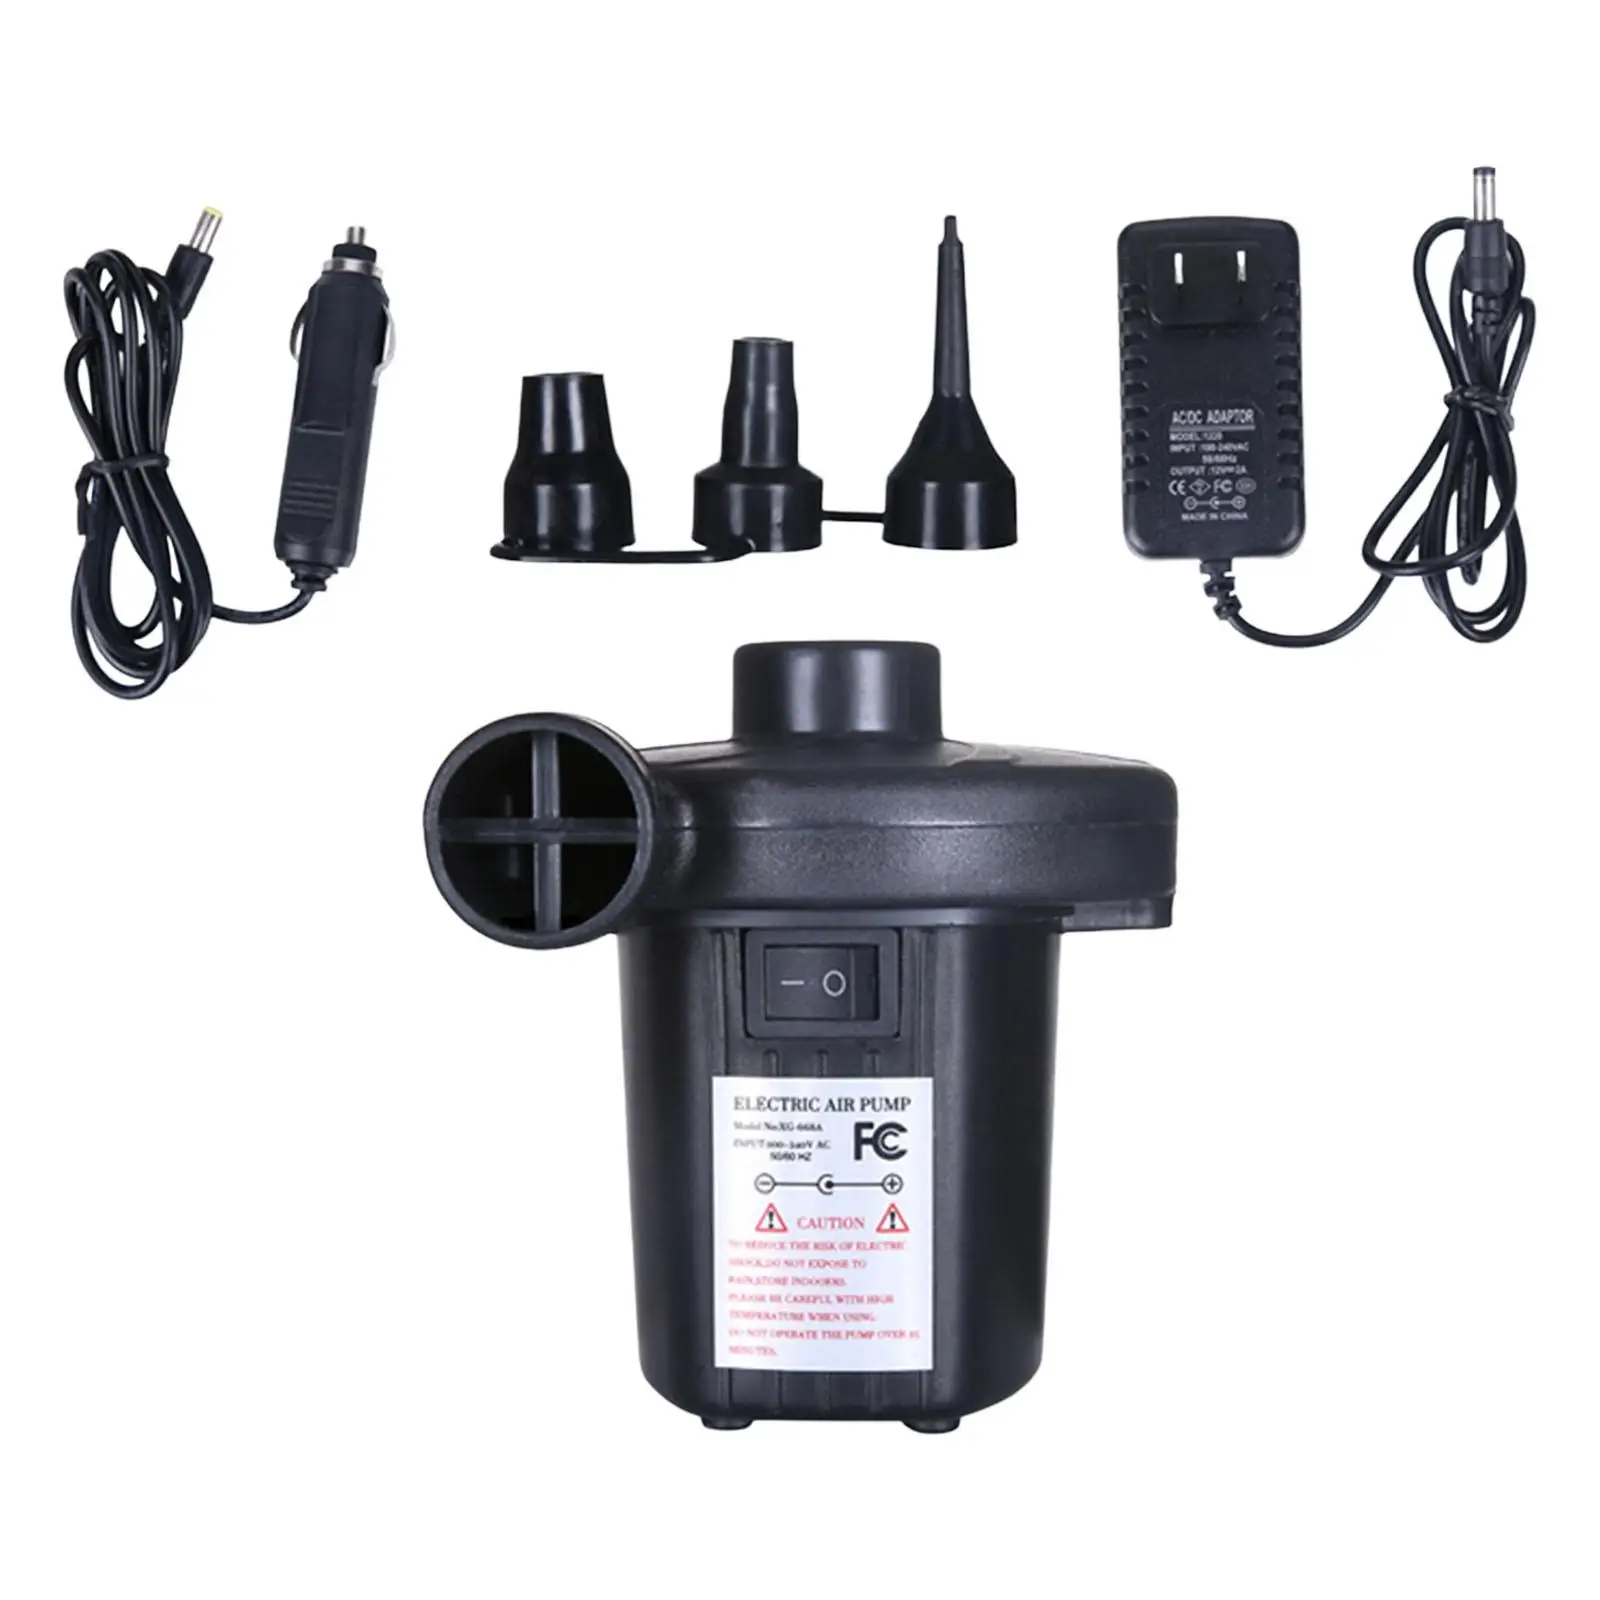 Electric Air Pump Air Mattress Pump with 3 Heads Nozzle for Inflatables Air Beds Outdoor Camping